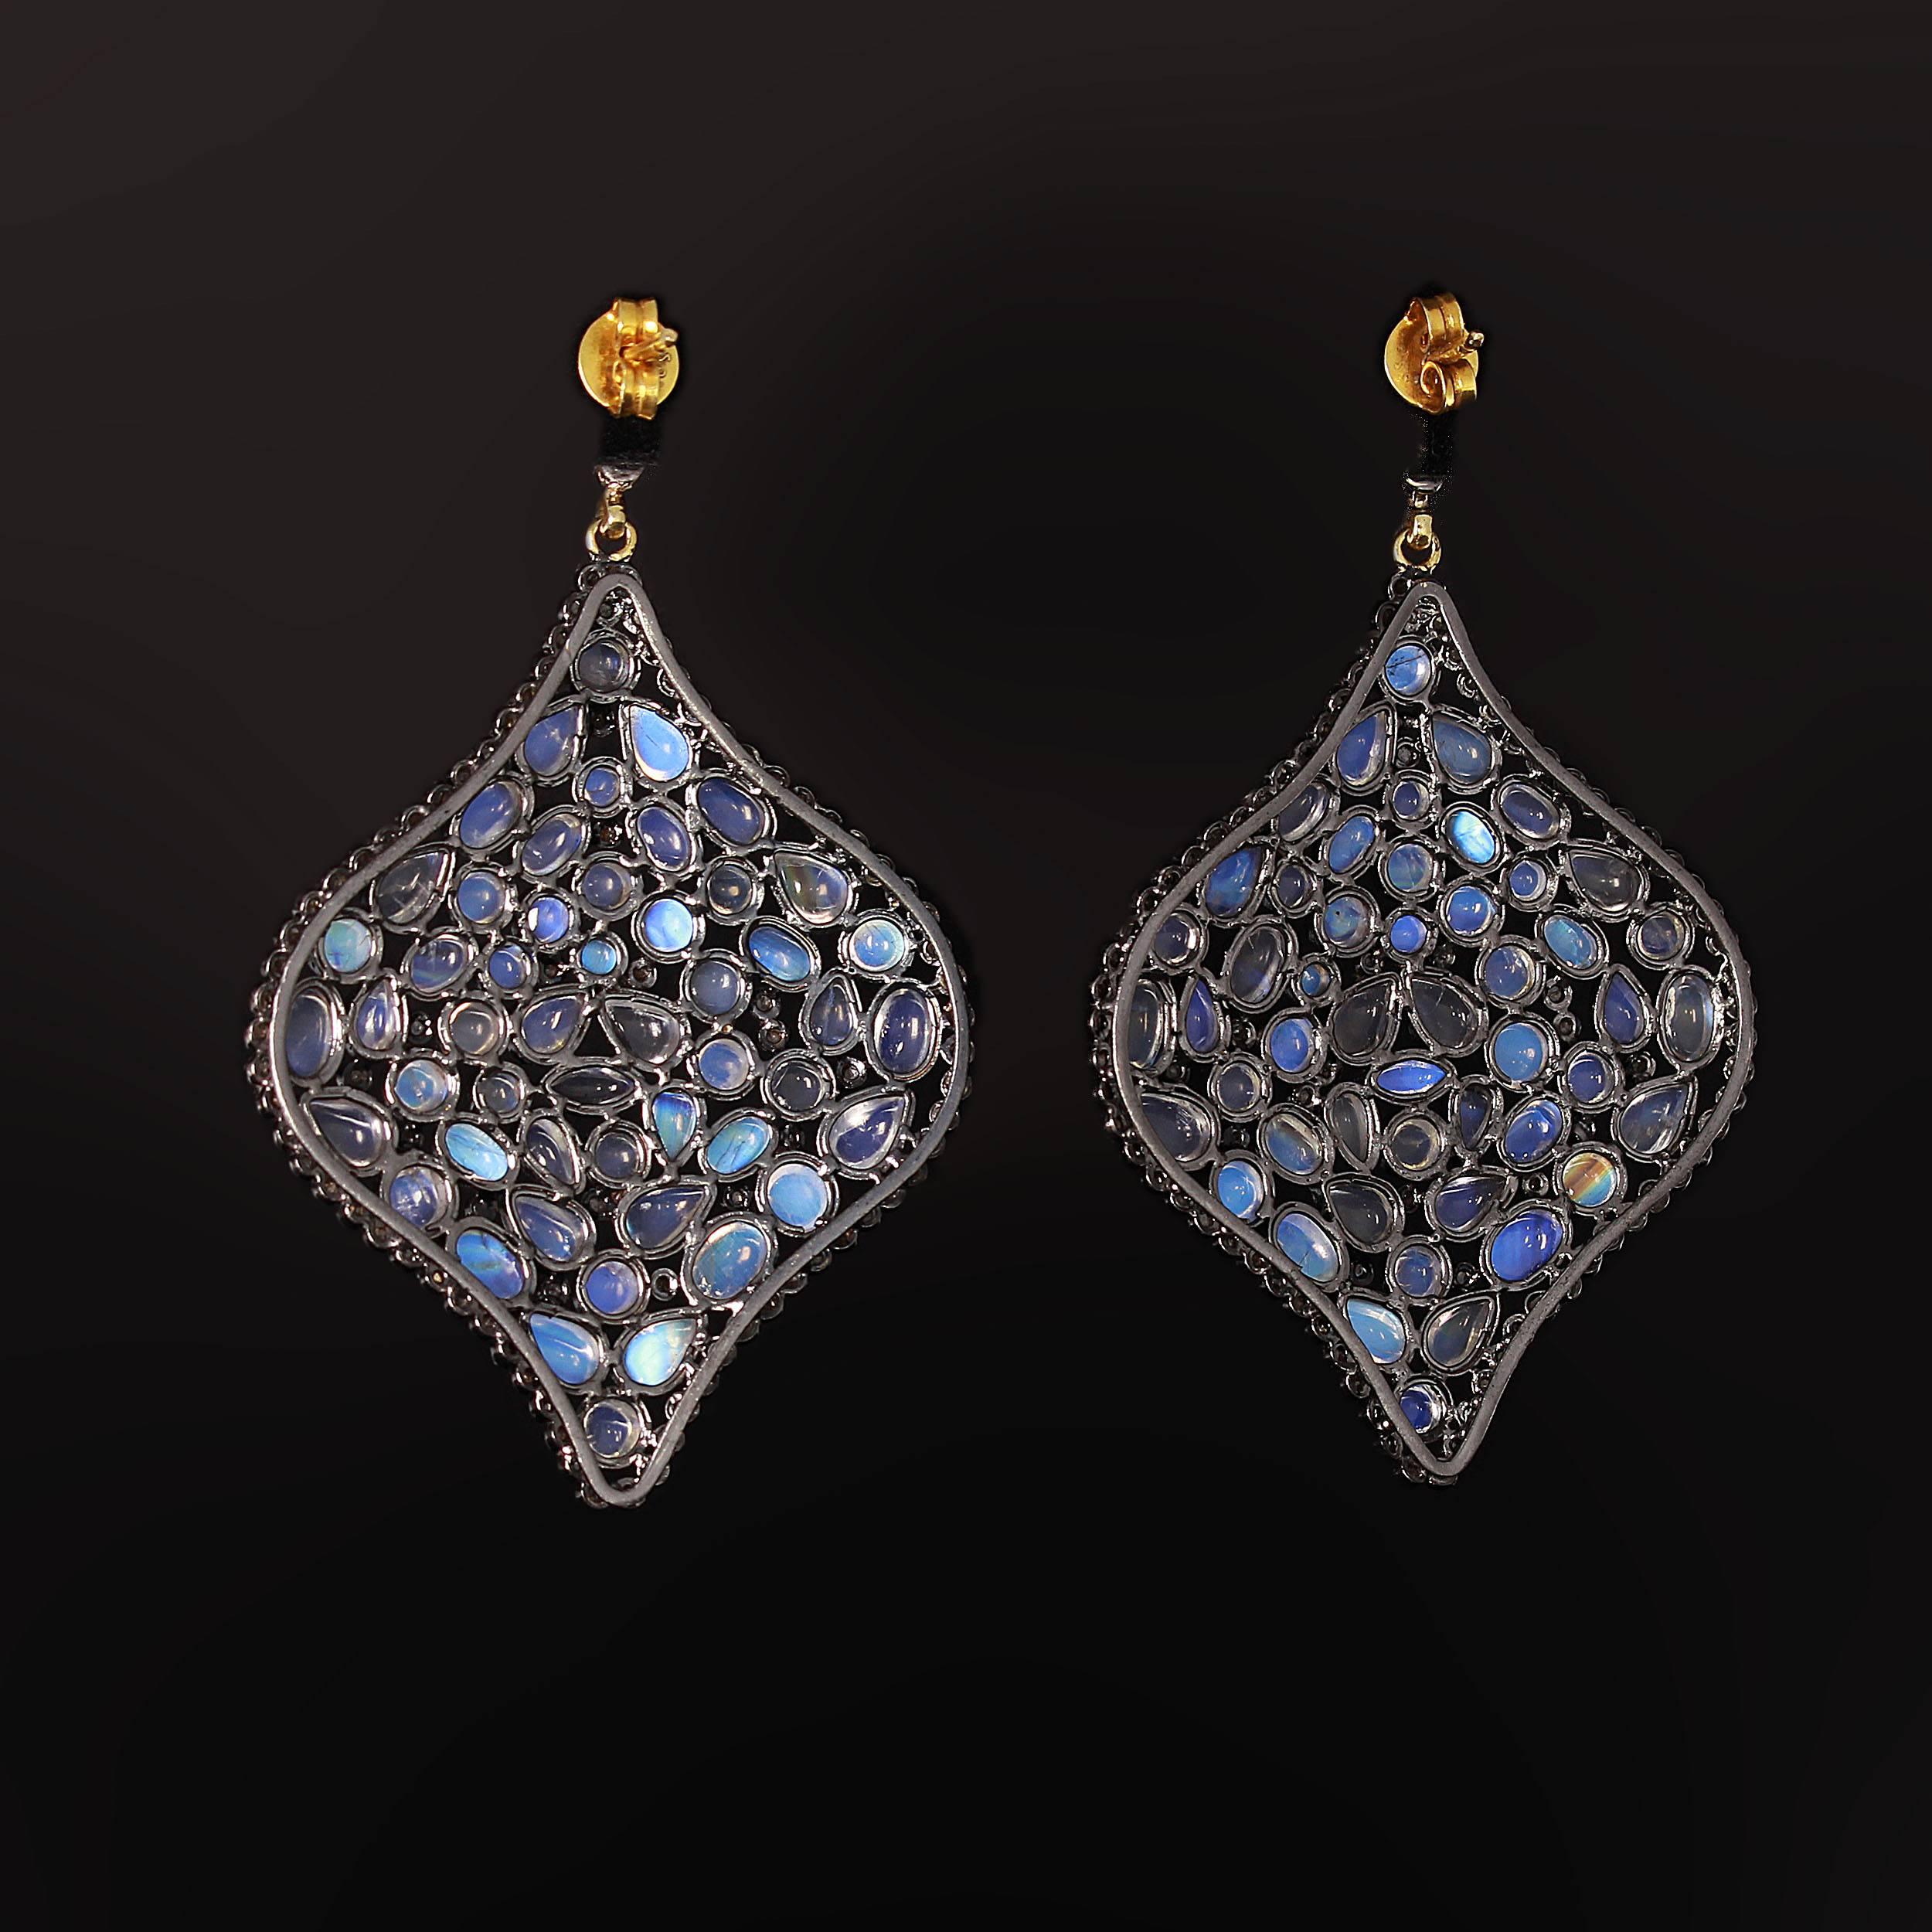 Set with oval- round- and teardrops shaped blue moonstones weighing circa 
37,10 ct. Surrounded by 170 diamonds weighing approximately 4,50 ct. 
Mounted in 14 K yellow gold and silver. 
Dimensions: Length: 2.87 in ( 7,3 cm ), Width: 1.77 in ( 4,5